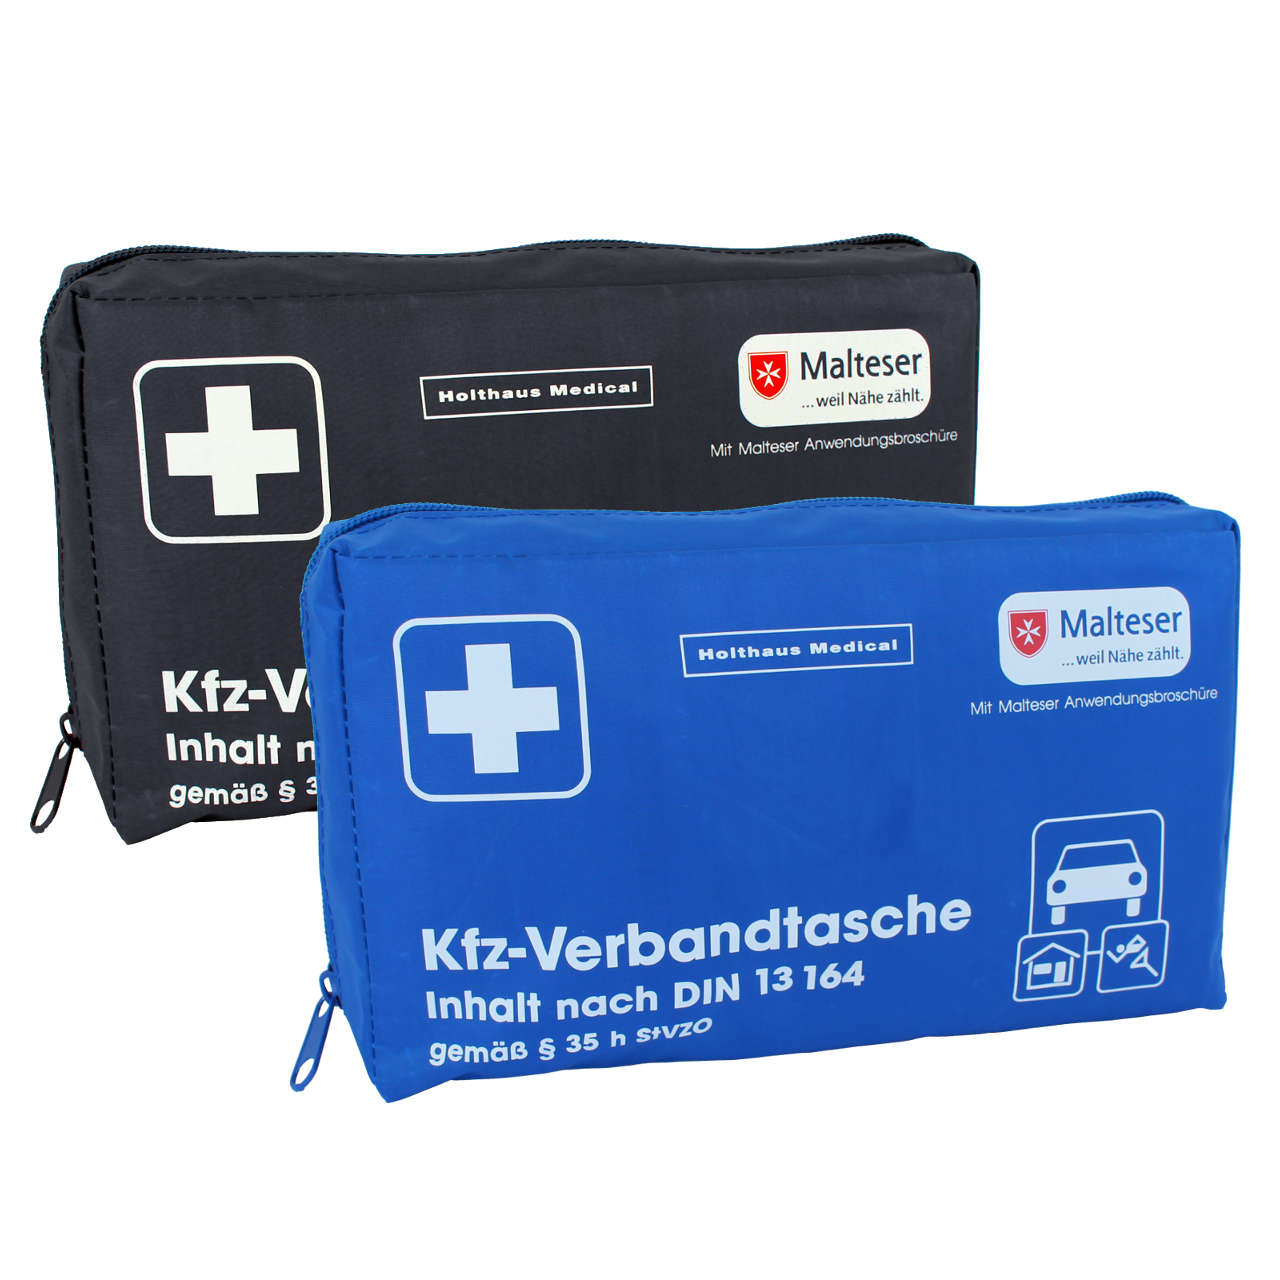 Holthaus Medical First aid kit for cars DIN 13164 - online purchase